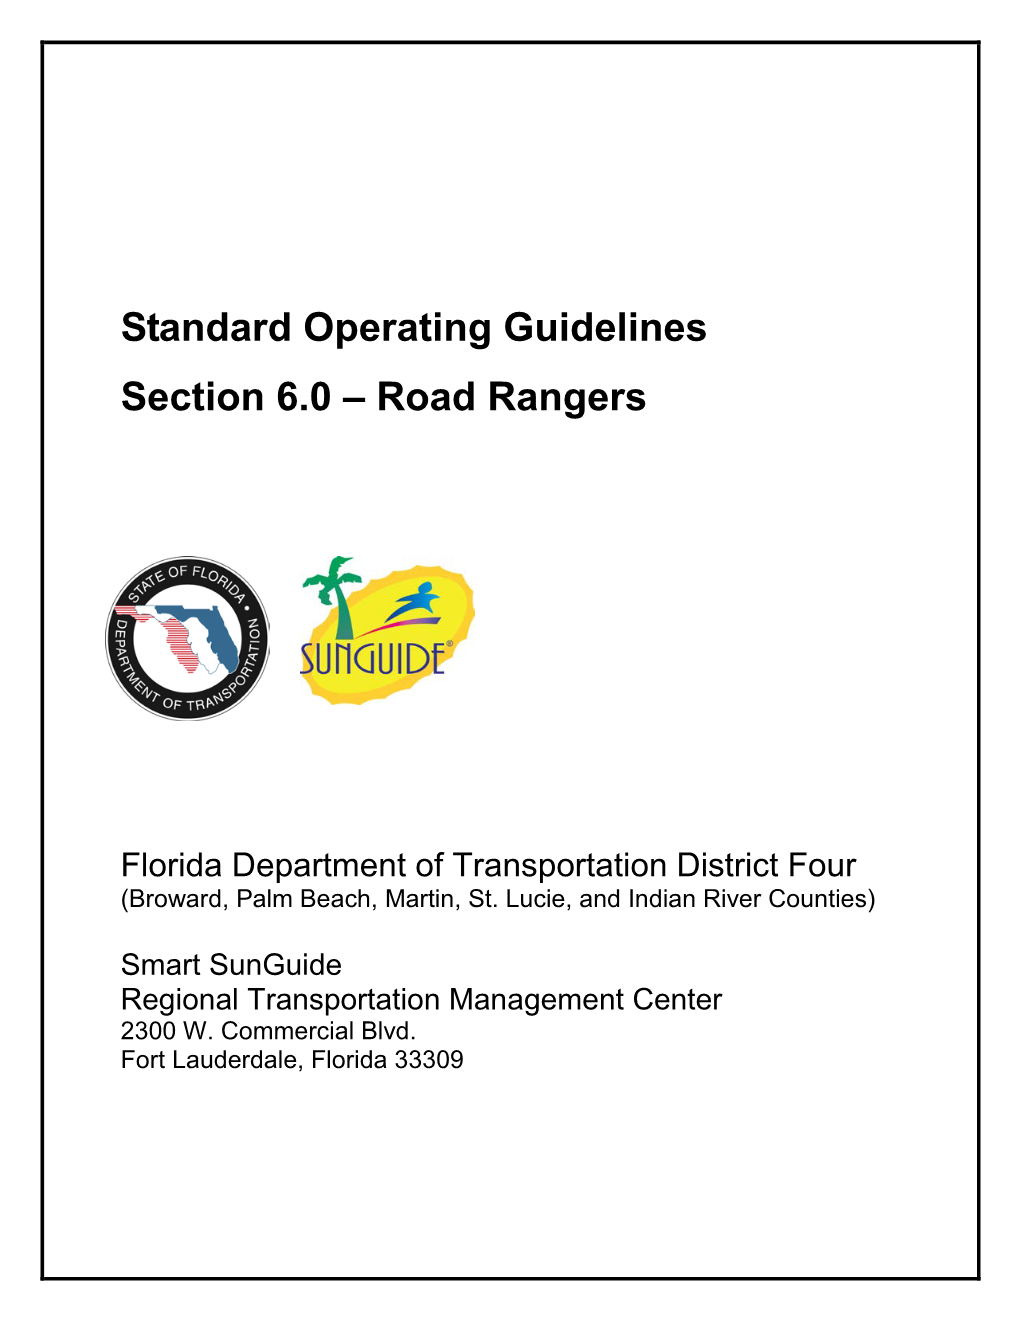 Standard Operating Guidelines Section 6.0 – Road Rangers